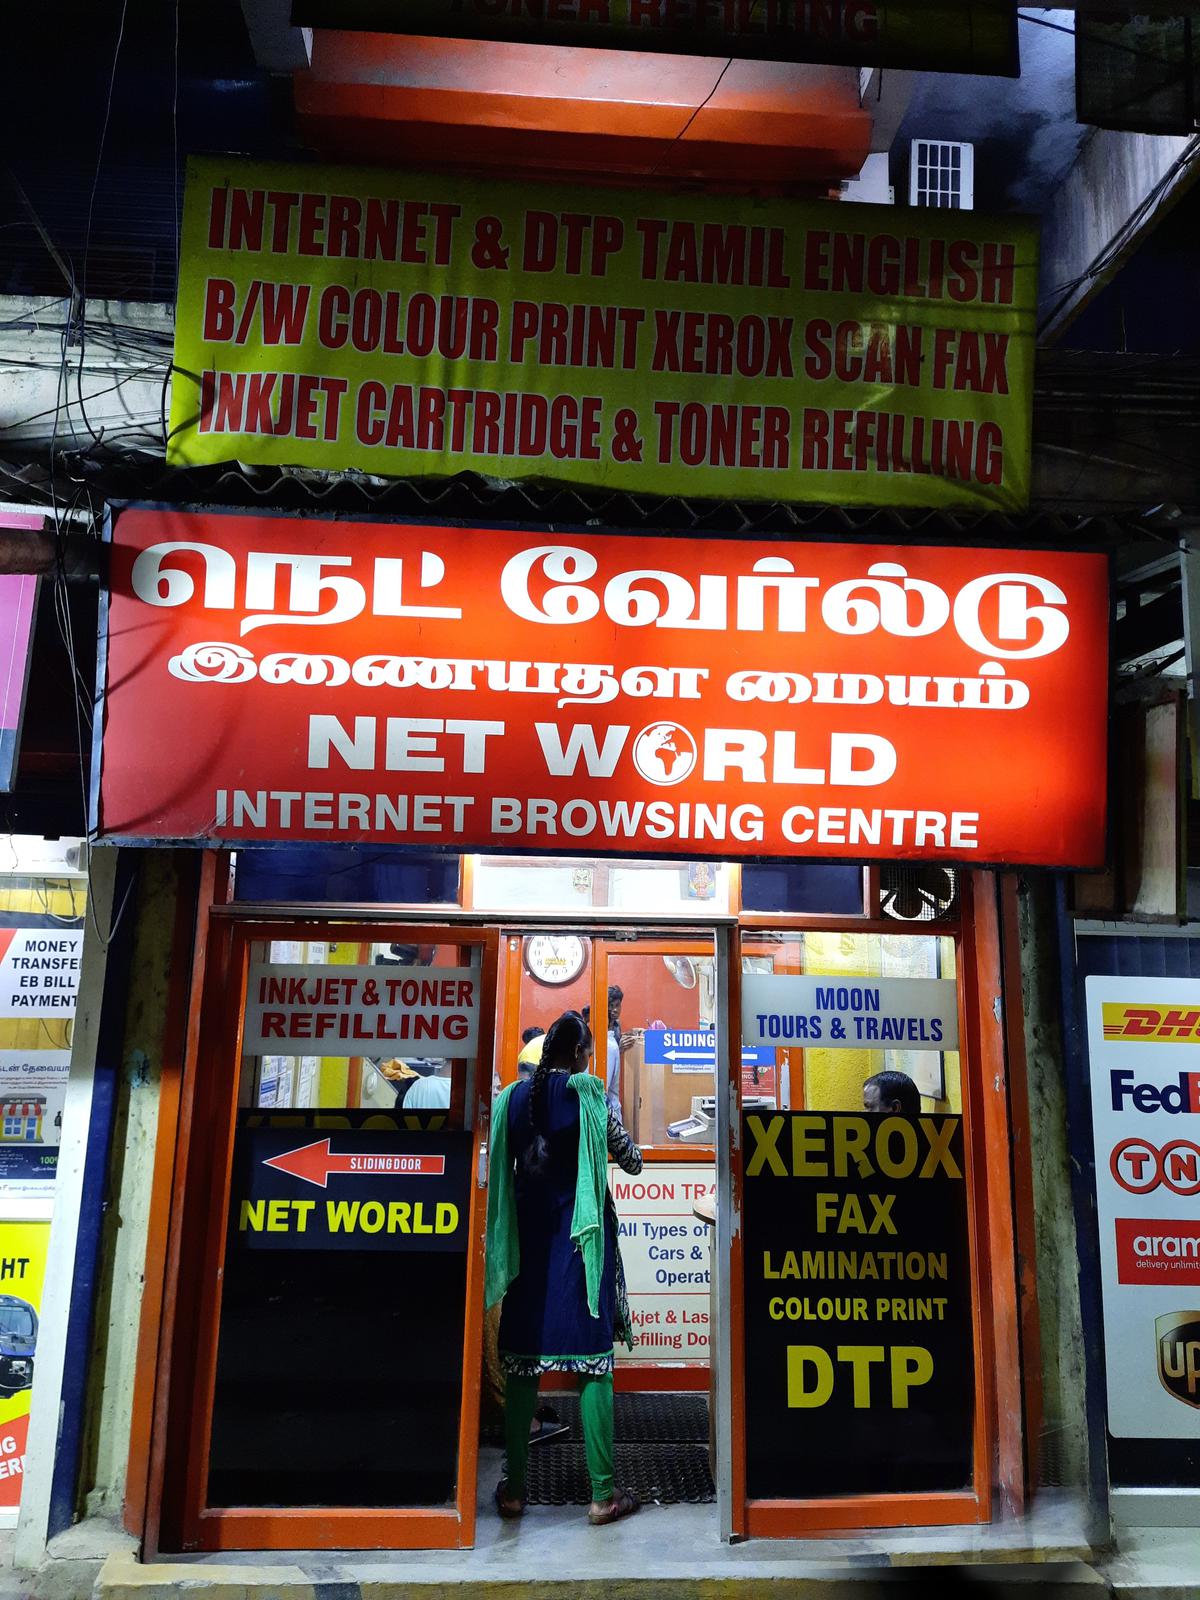 A browsing centre in Chennai